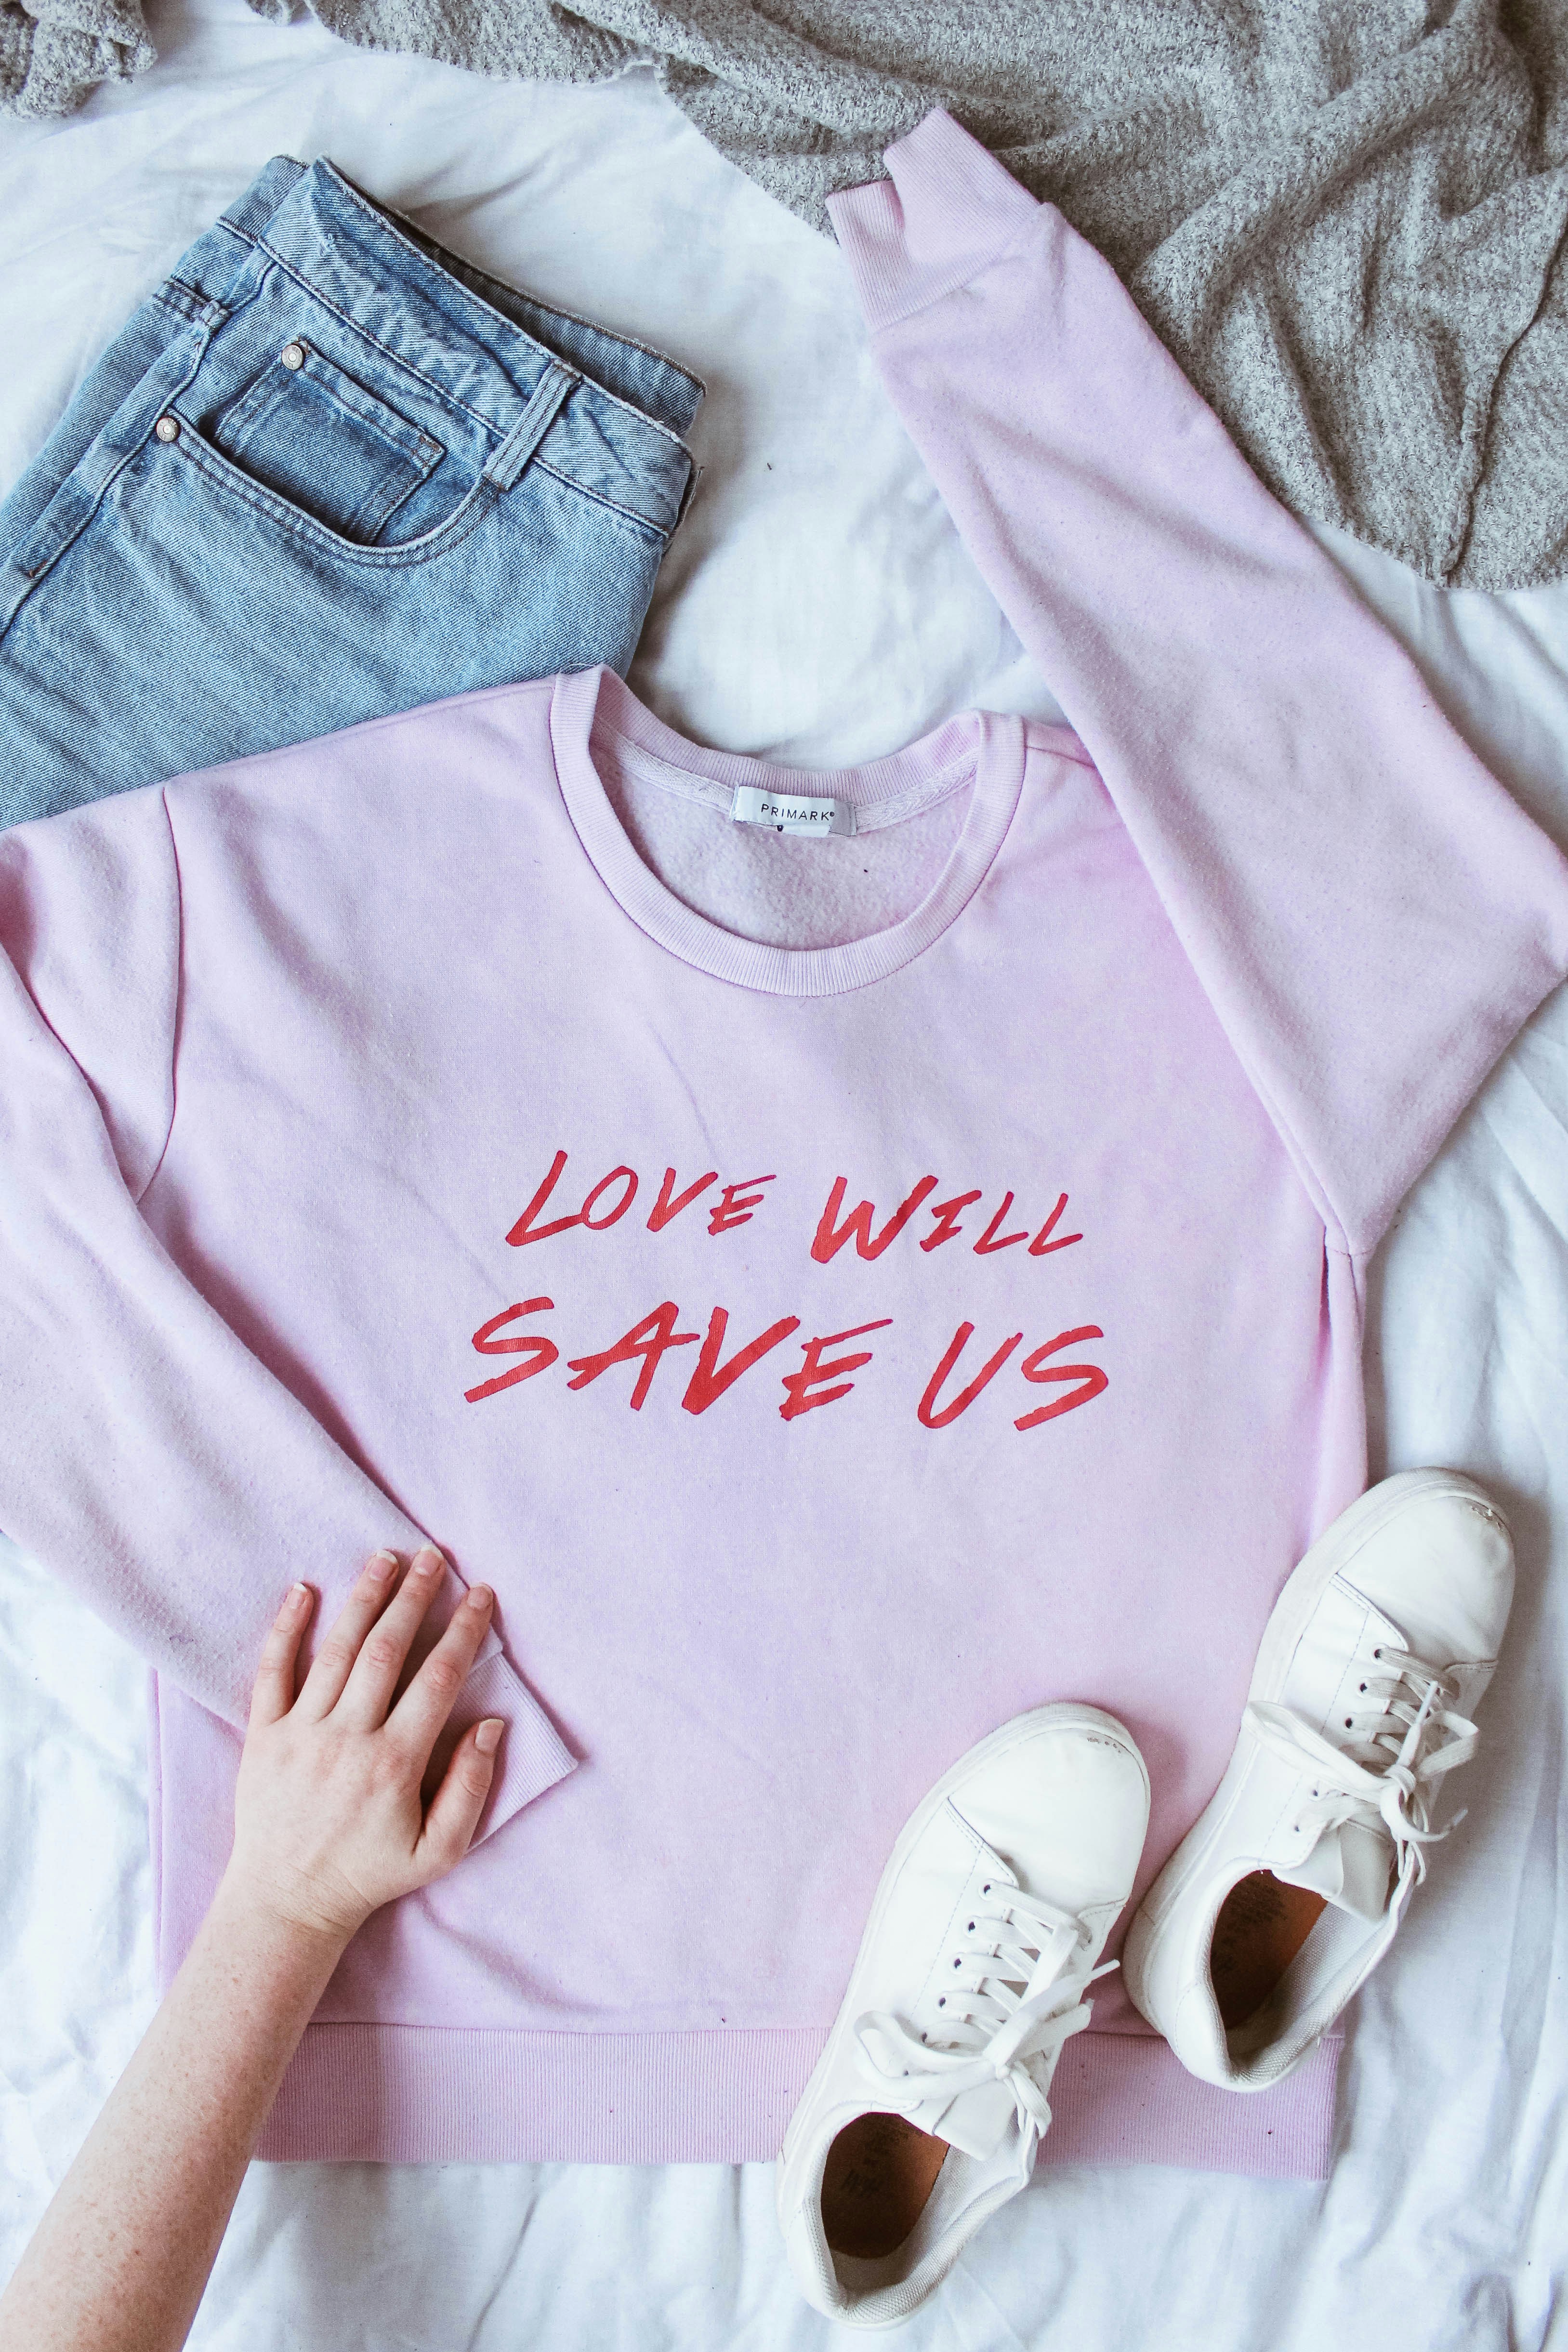 I bought this shirt in London and it has turned into one of my firm favorites! Love will save us! I love wearing that branded across my chest!